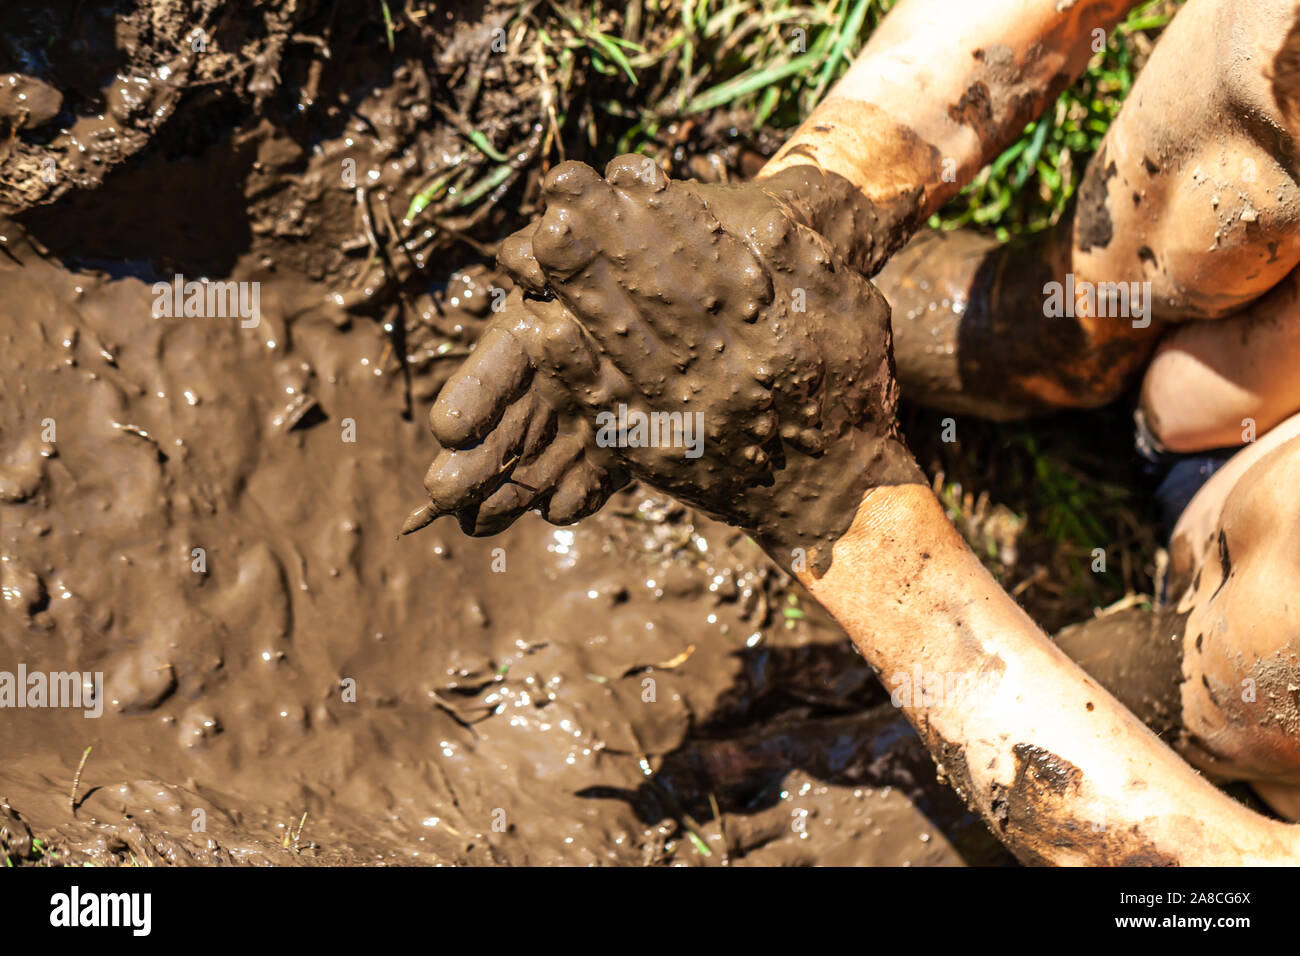 Boy working and playing in the mud. Stock Photo